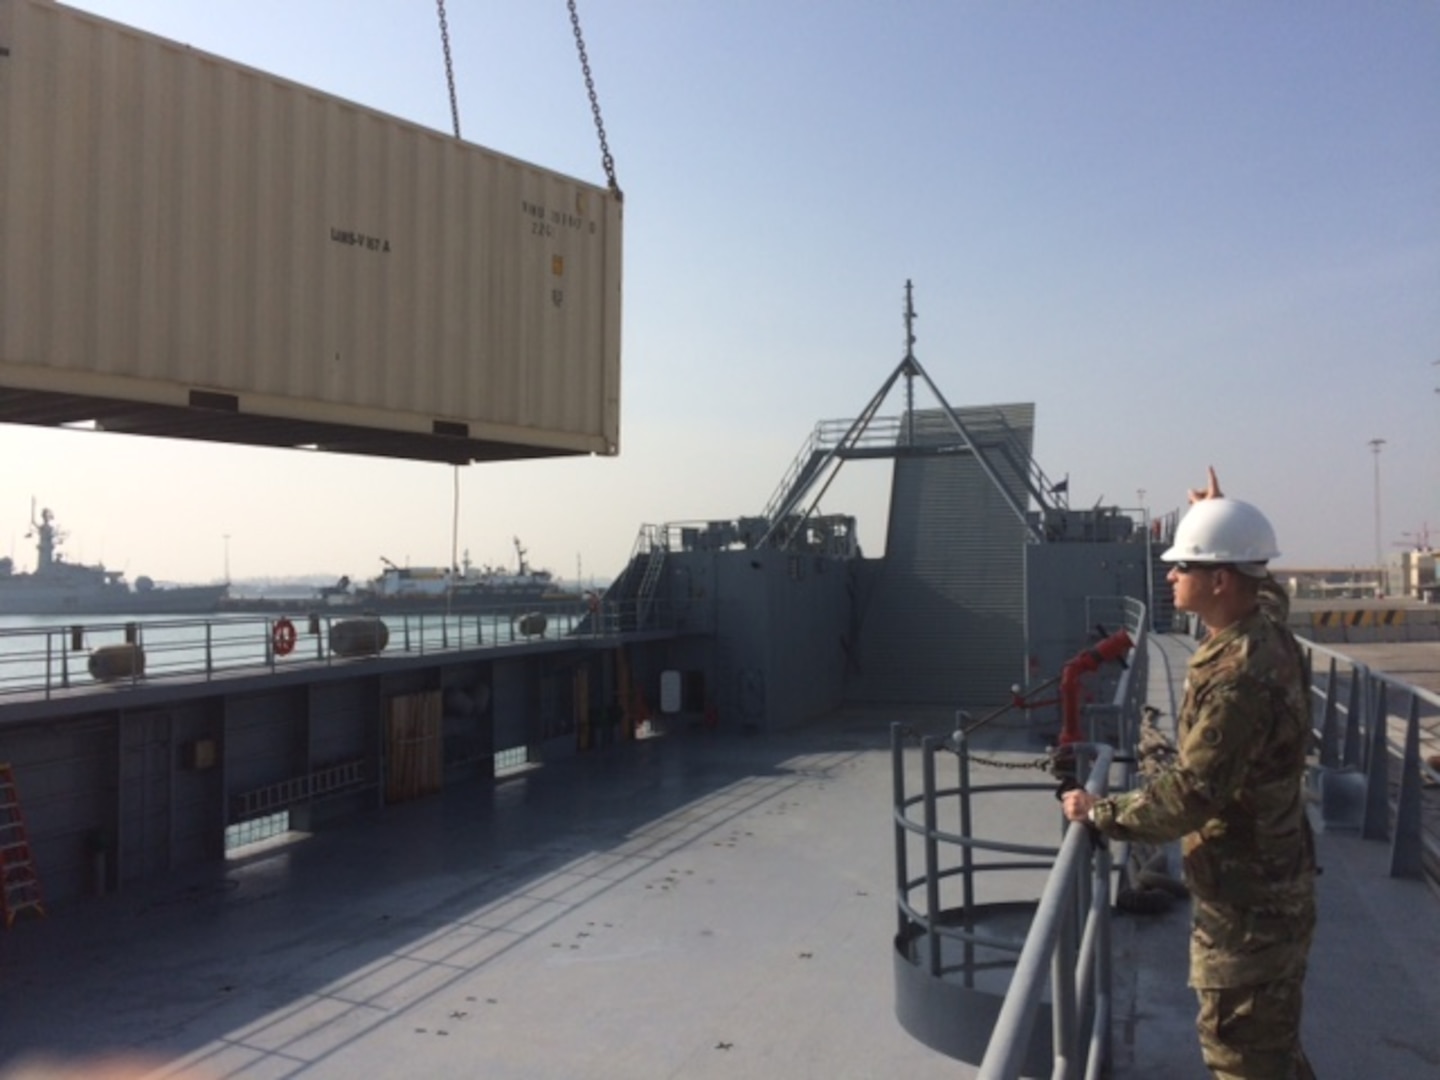 DLA Distribution Bahrain participates in the container upload for the Army Watercraft test from Mina Salman Pier Bahrain to Disposition Kuwait on Dec. 22.